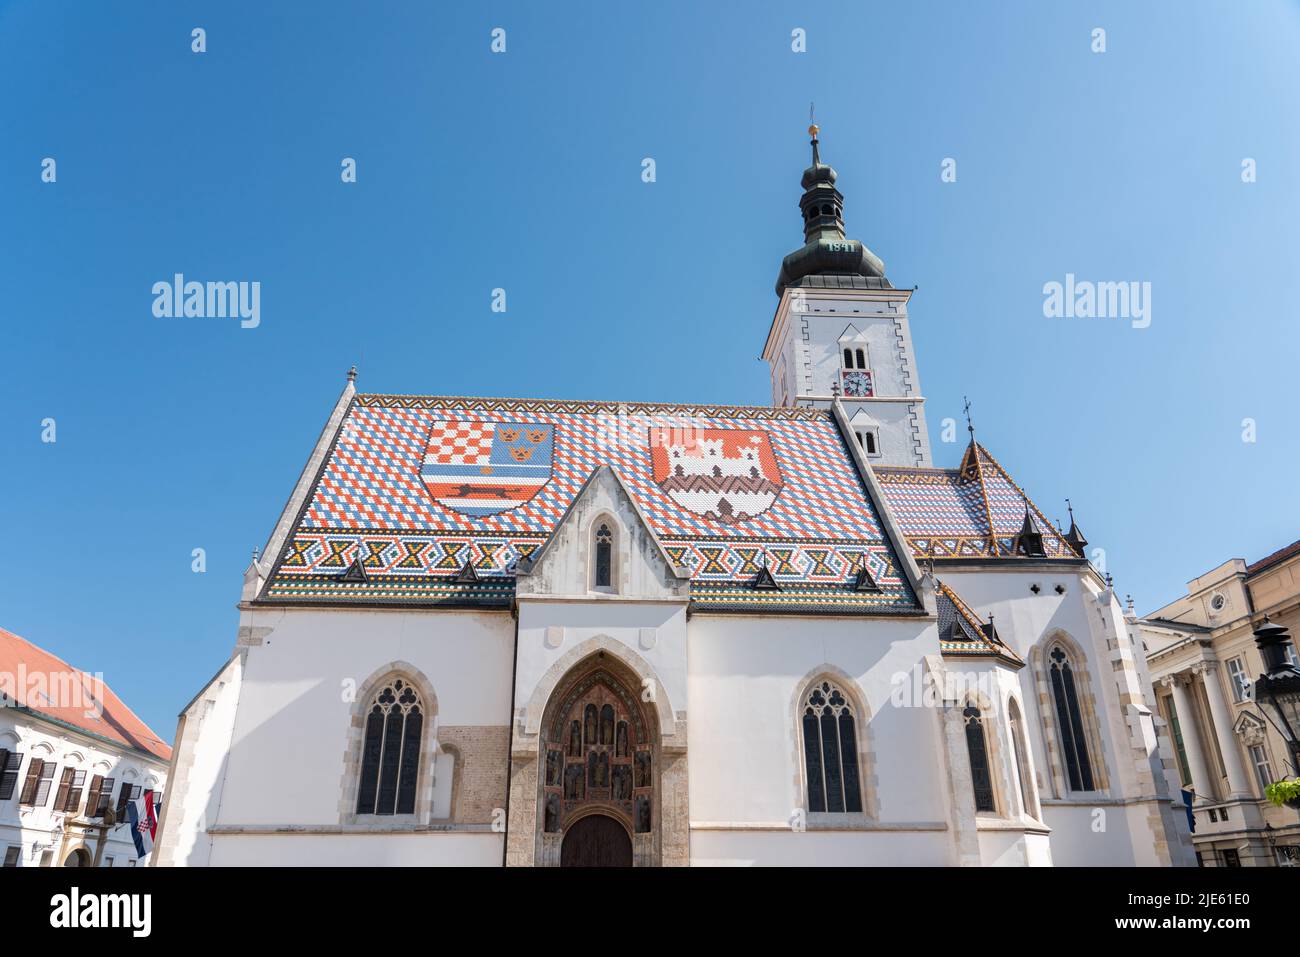 ZAGREB, CROATIA - JULY 29, 2021: Saint Mark’s Church uniquely colorful tiled roof makes it a Zagreb icon and it is one of the oldest buildings in the Stock Photo